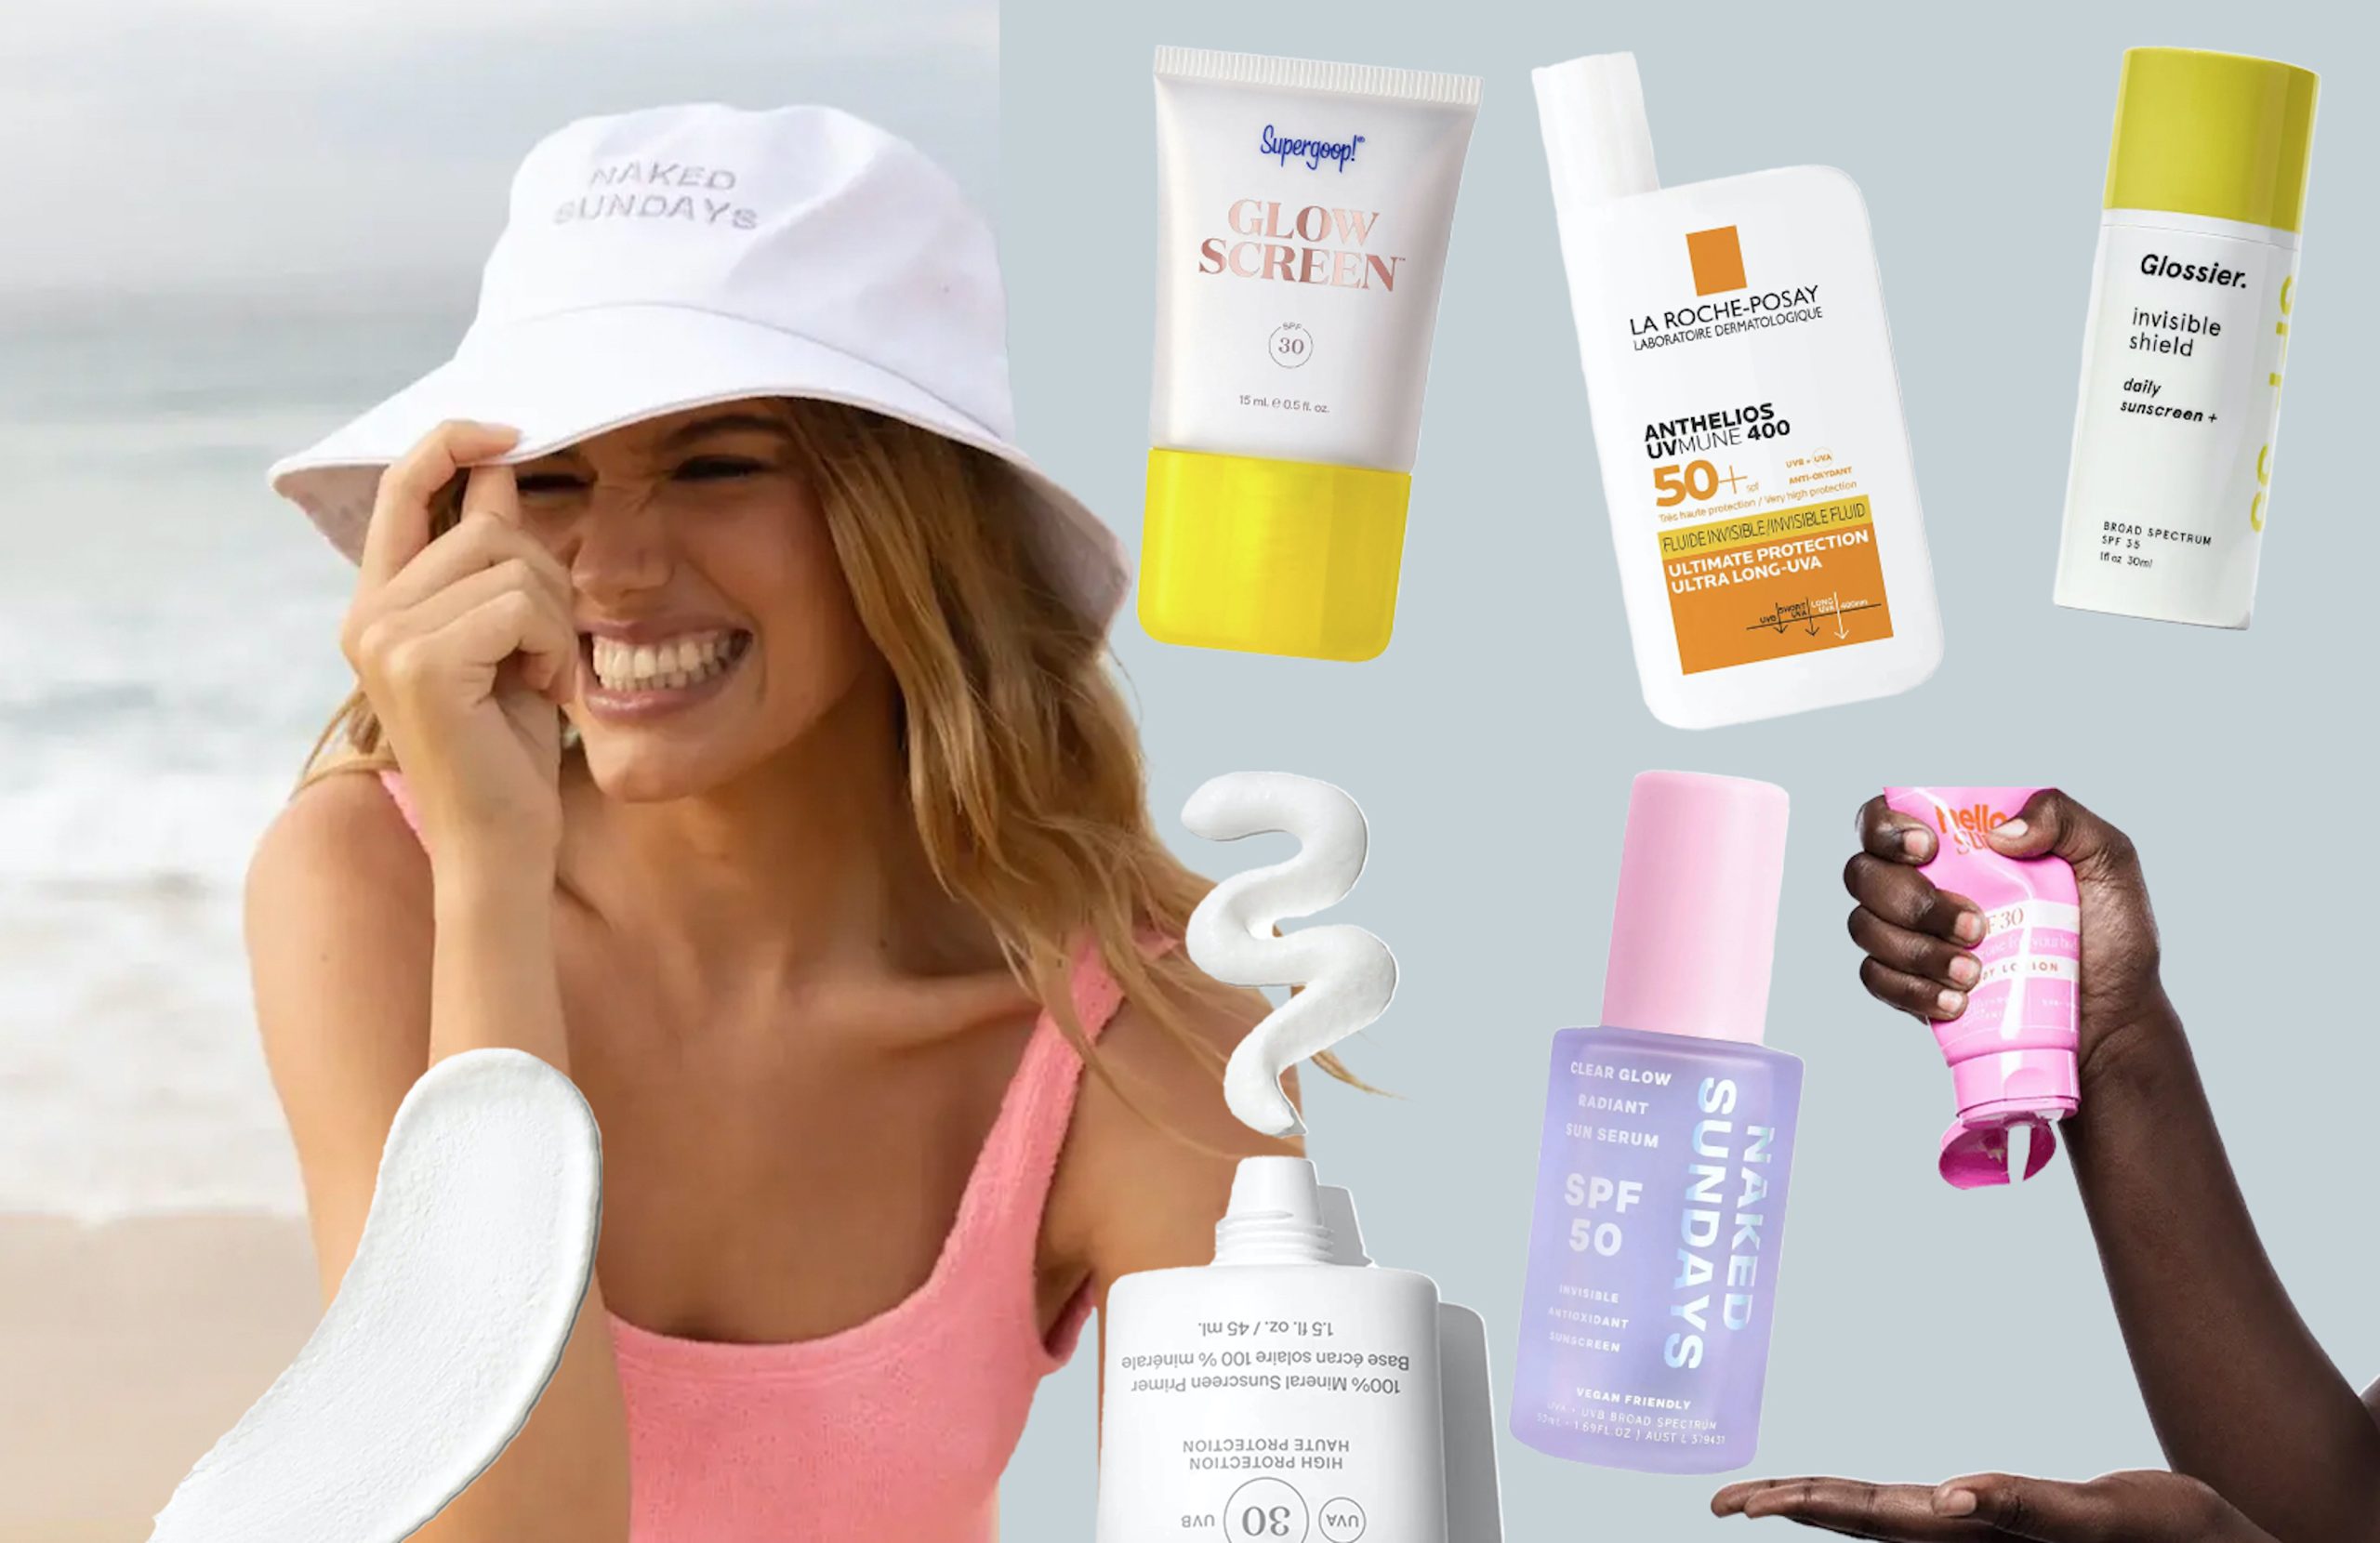 Four Sunscreen Tips To Make Wearing SPF Stress-Free